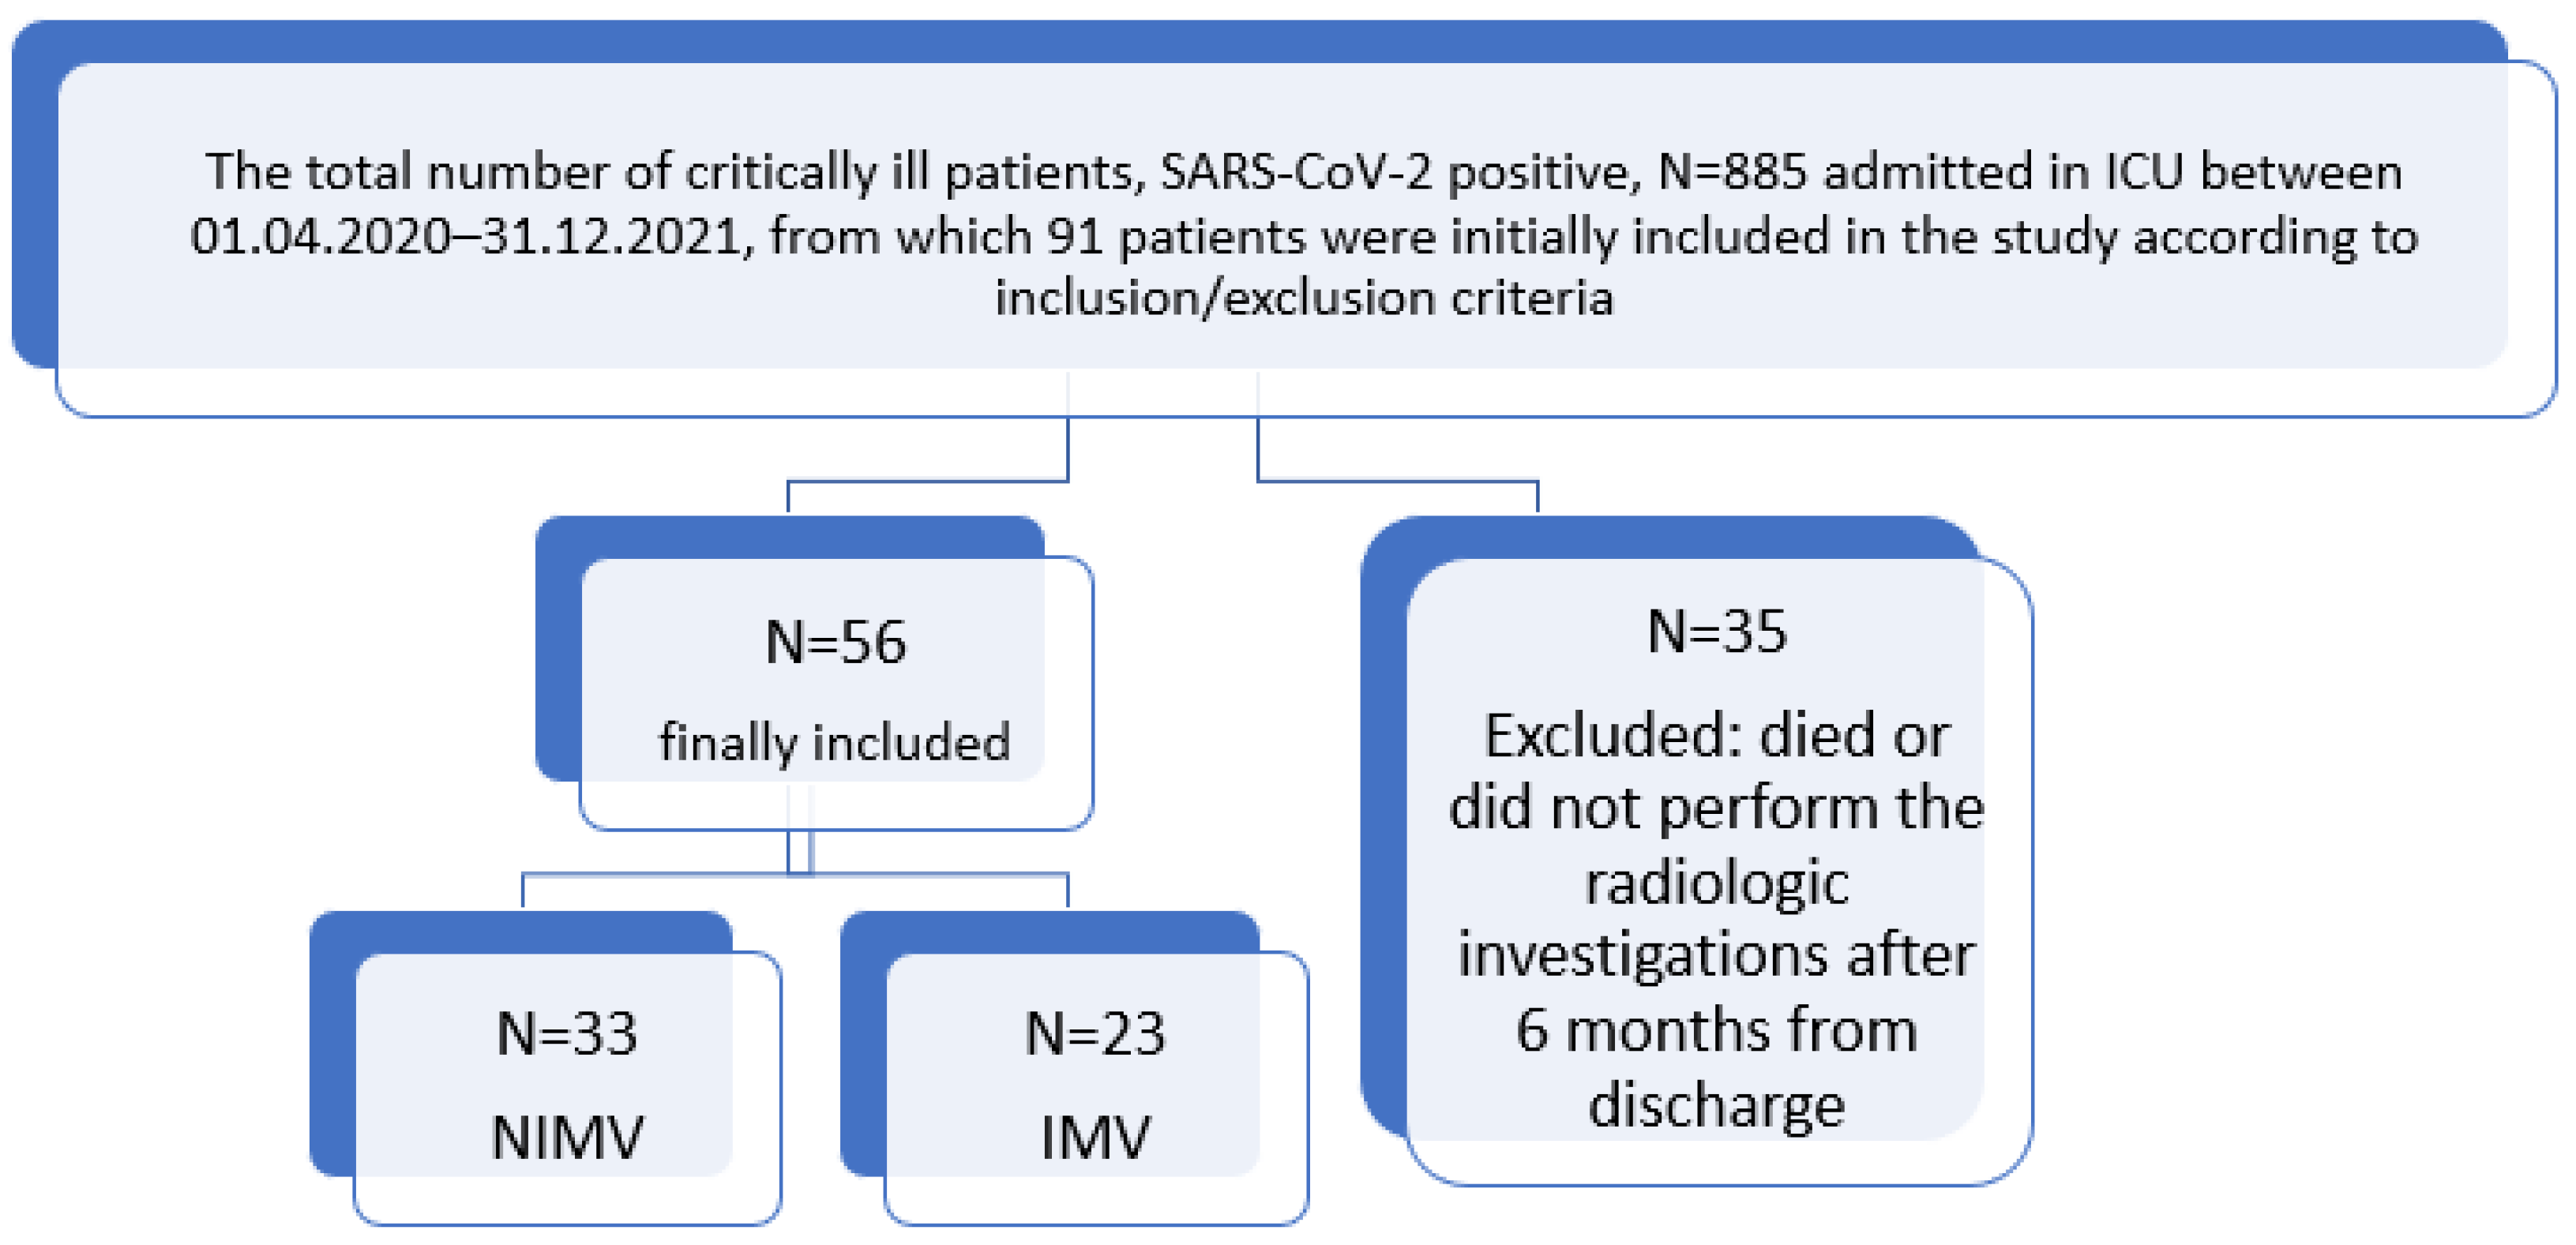 Death in hospital following ICU discharge: insights from the LUNG SAFE  study, Critical Care